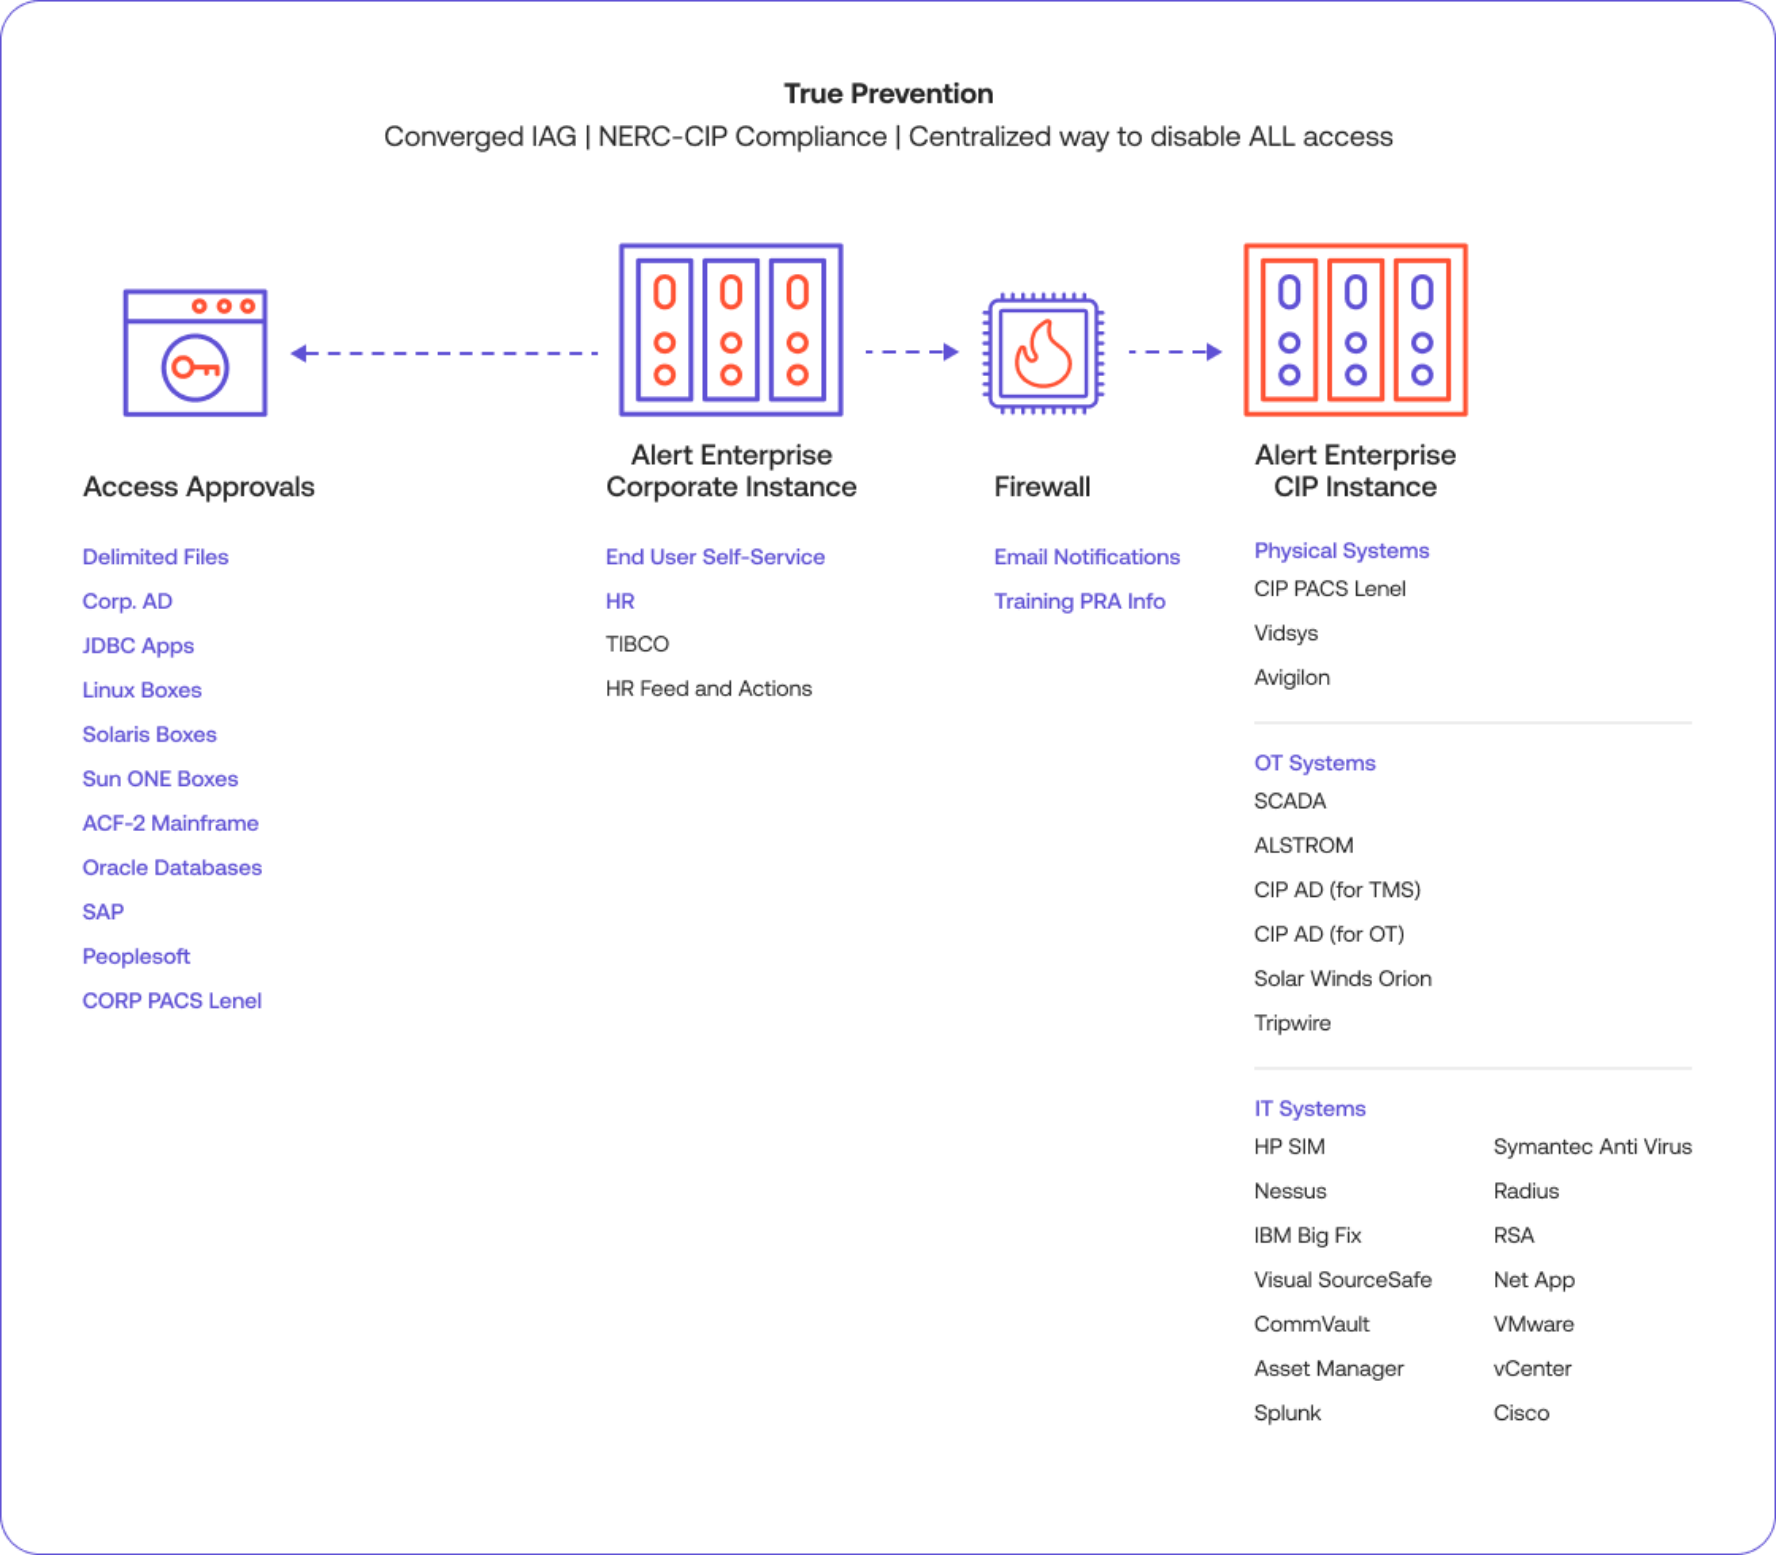 A graphic that lists out services related to true prevention with access approvals, Alert Enterprise corporate instance, firewall, and Alert Enterprise CIP Instance. This is a centralized way to disable all access.